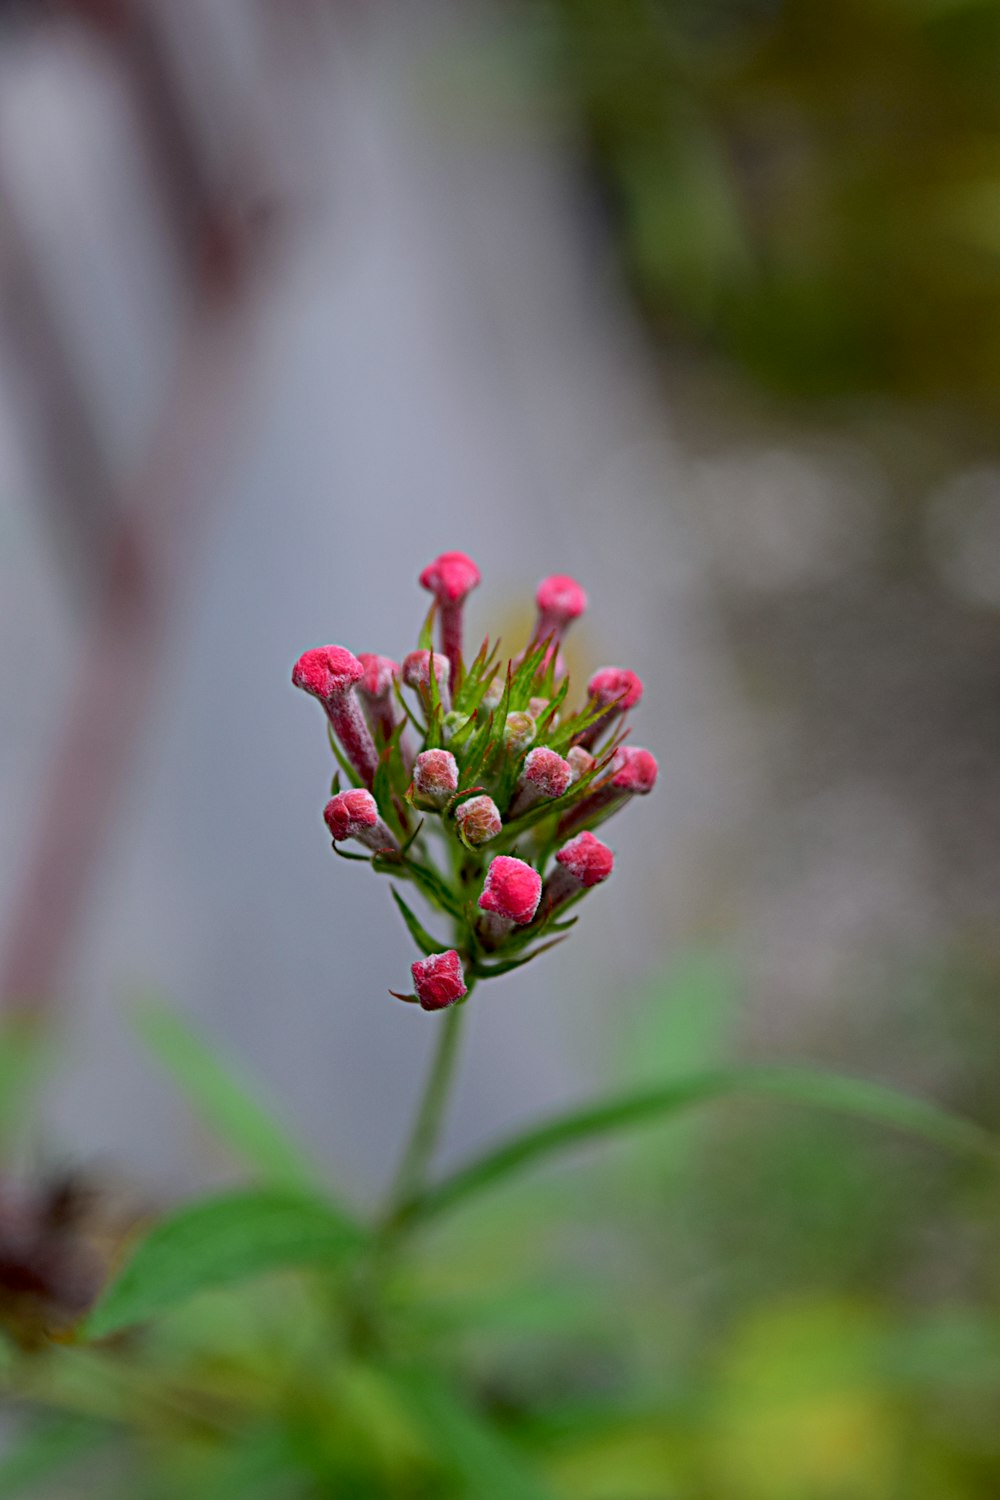 a close up of a small pink flower